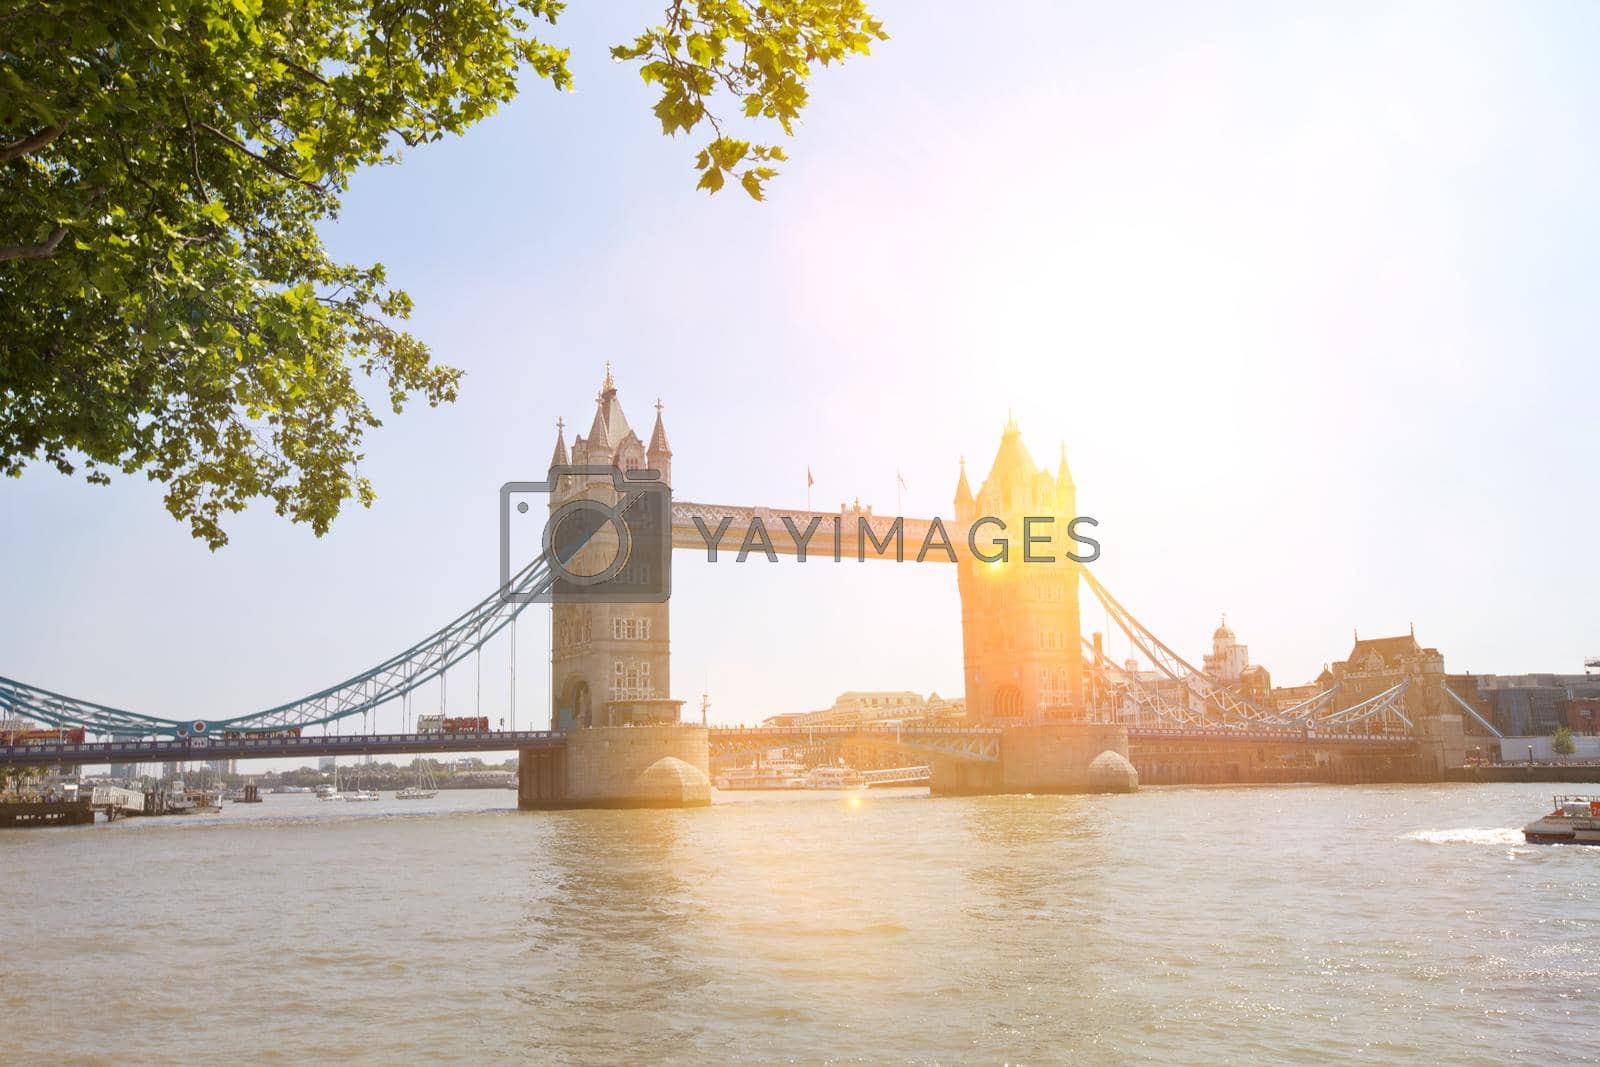 Royalty free image of Tower bridge in London by moodboard